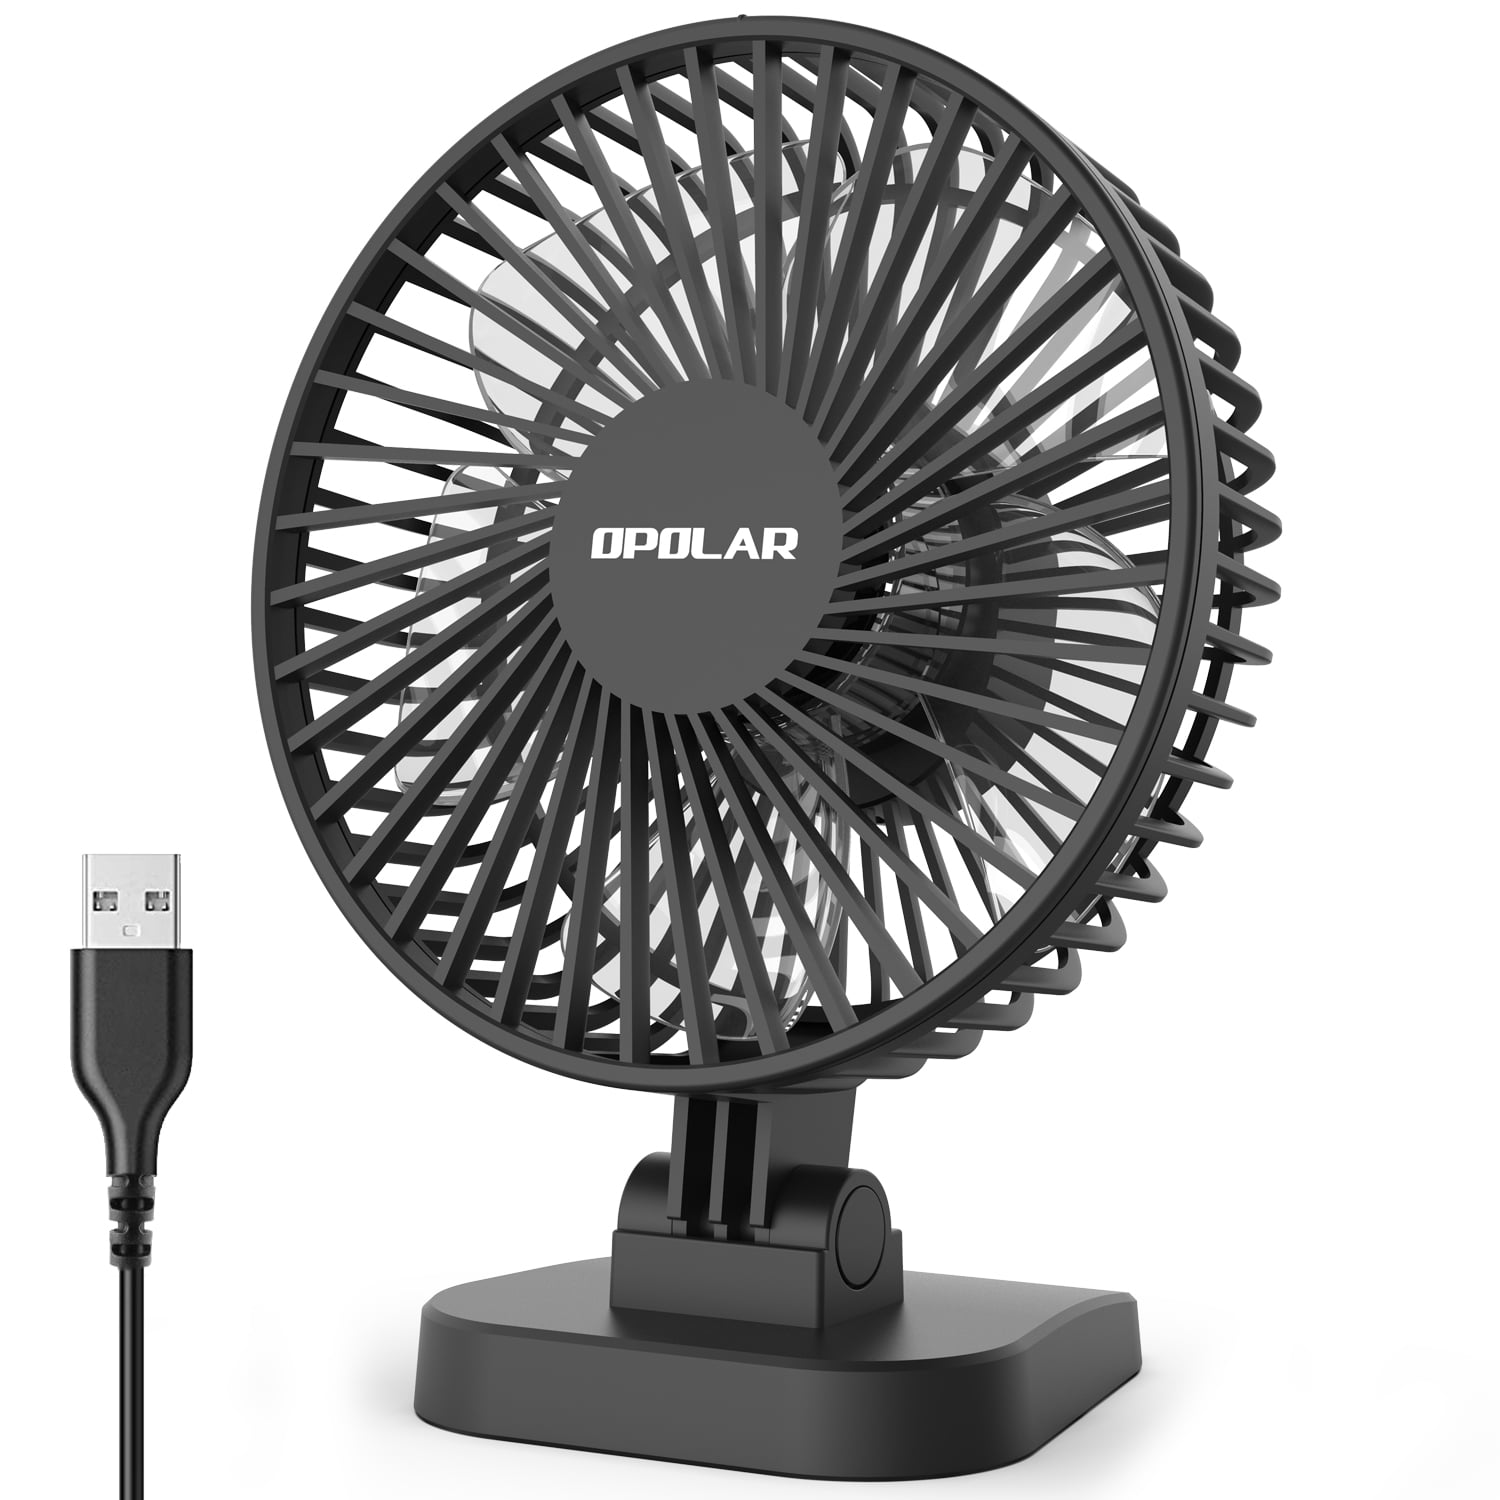 Wallfire Portable USB Desk Fan Rechargeable Desktop Oscillating Fan Cooling Fan with Adjustable Head 2 Speeds Small Quiet Personal Table Fan with Strong Wind for Home Office Travel Black